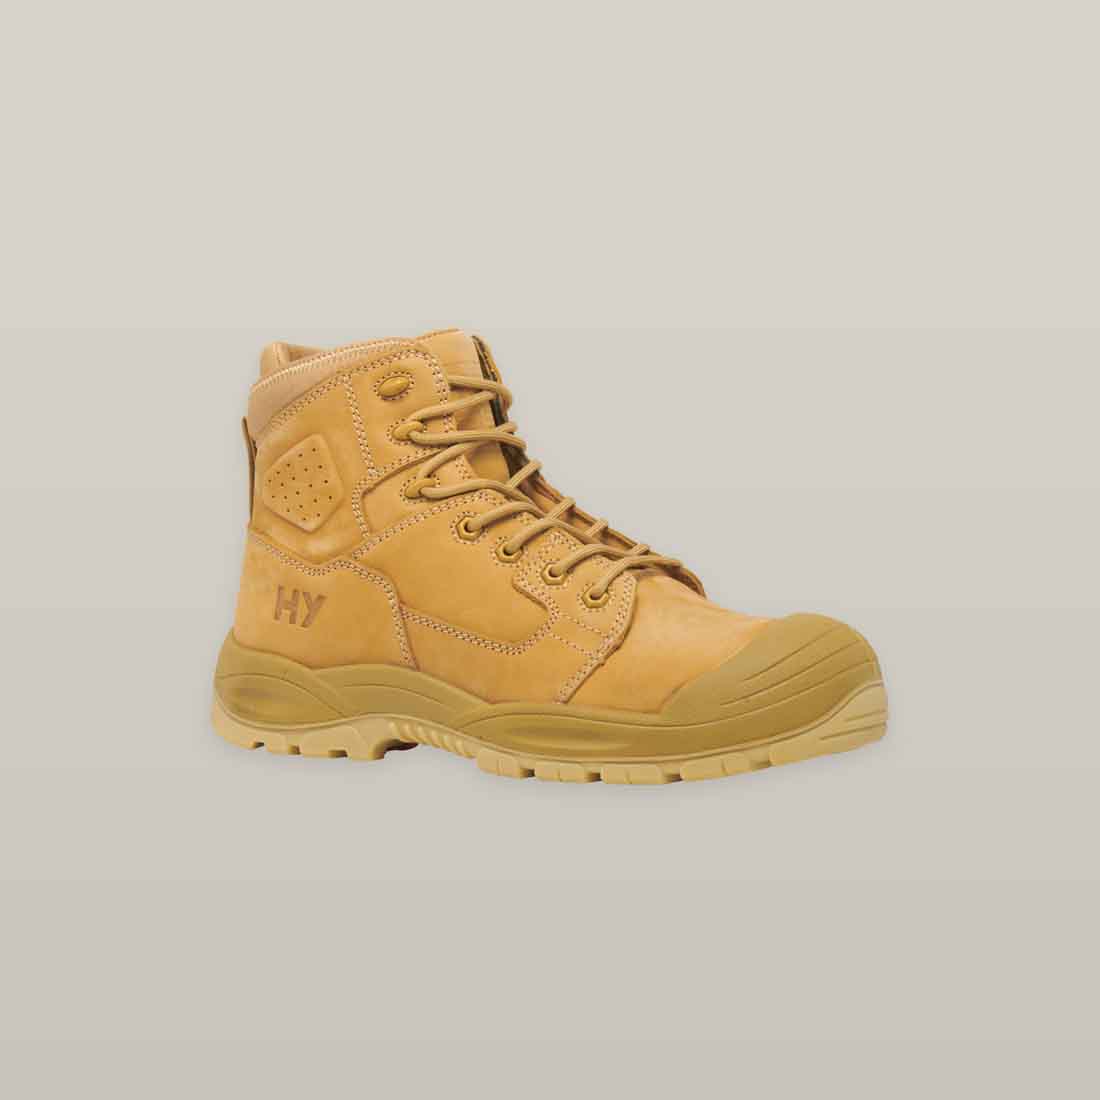 Hard Yakka Legend Safety Boots in Light Tan | Tan Safety Boots for Men & Women